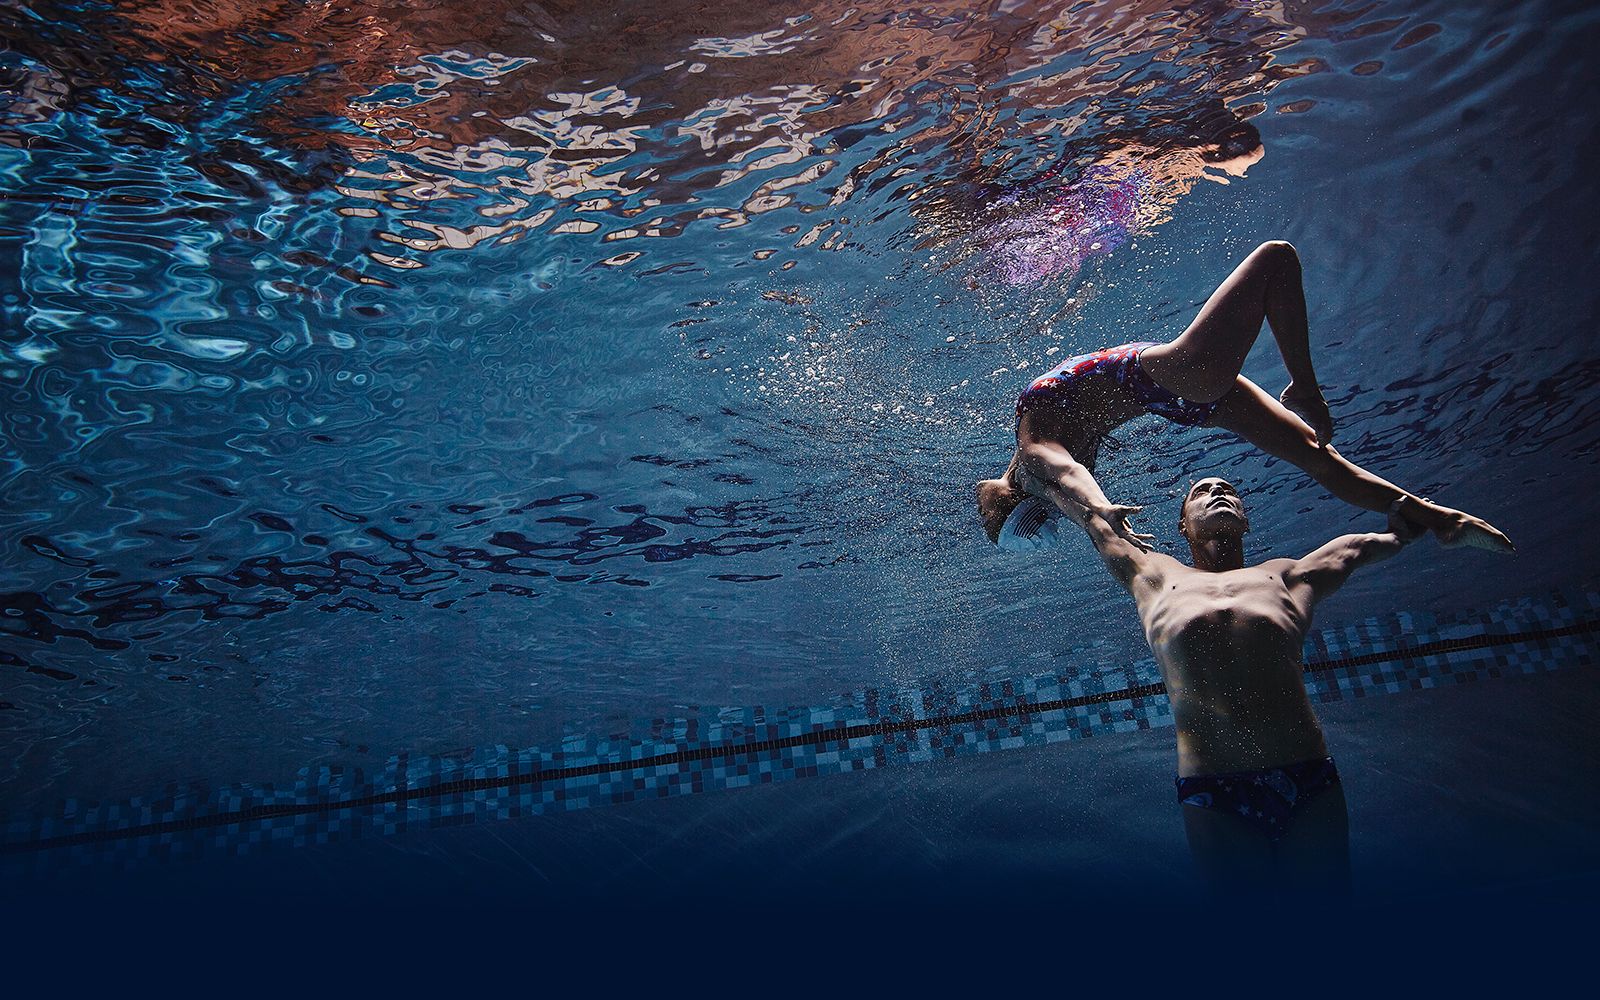 The story of the greatest synchronized swimmer ever and his quest for Olympic gold photo